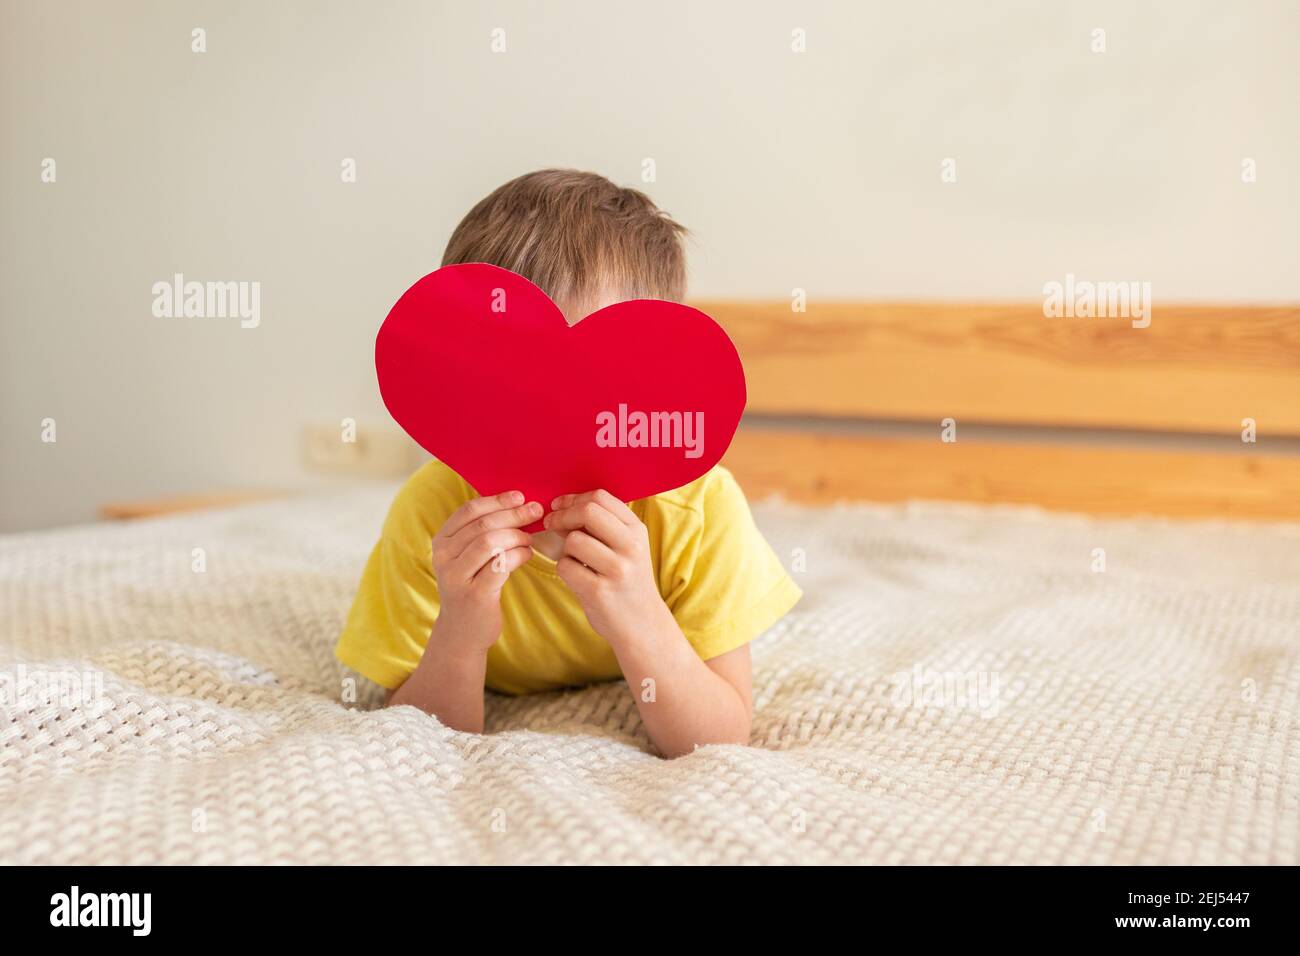 Little boy lying on the bed and holding a red heart made of colored paper, covering his face. Concept for March 8, Mother's Day. Postcard Stock Photo